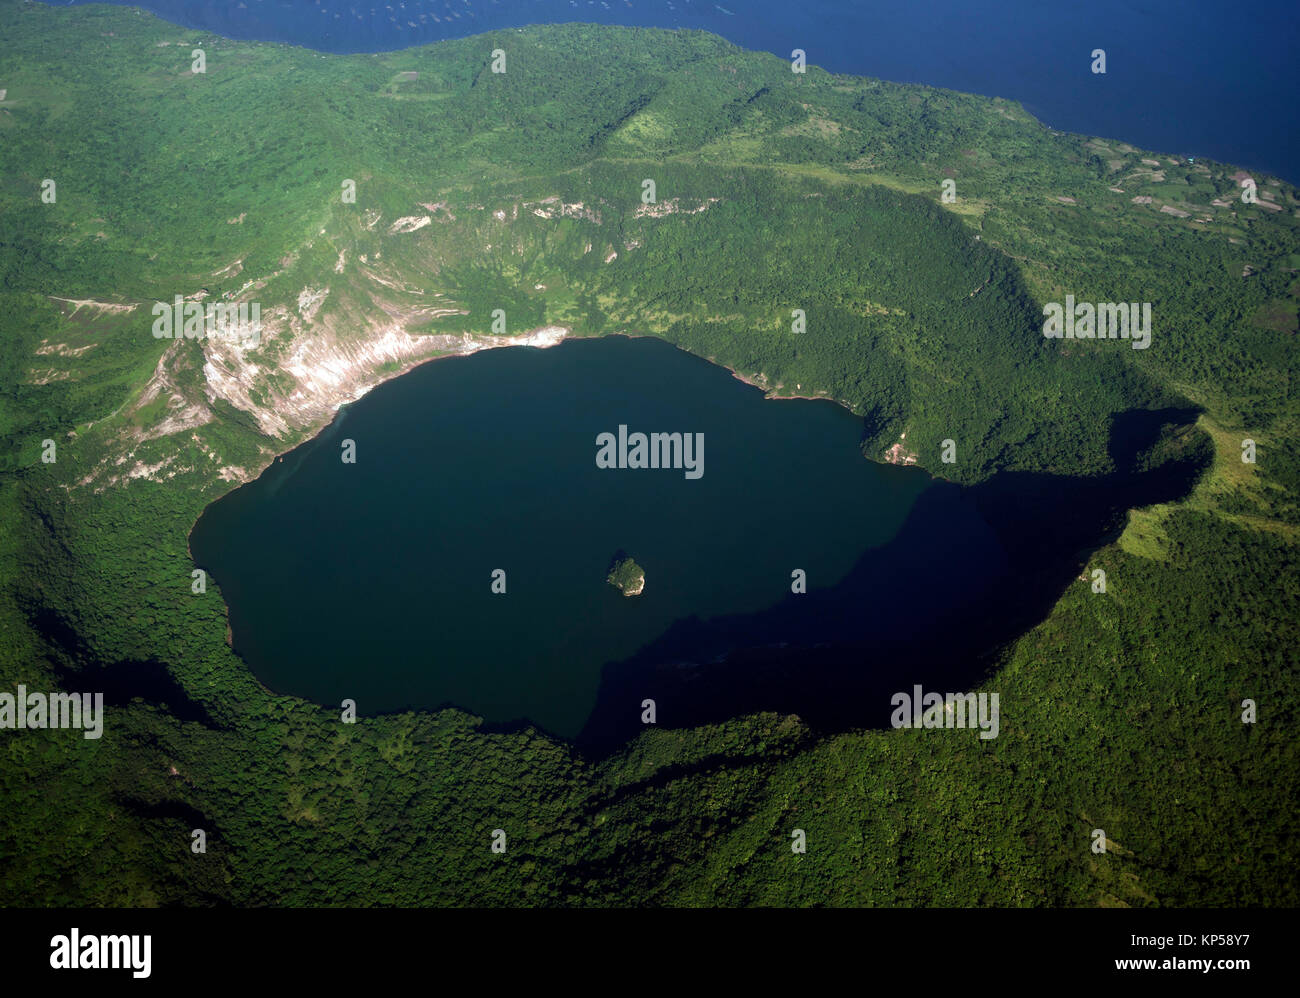 Volcano Island, Taal Lake, Tagaytay, Luzon, Philippines, South East Asia Stock Photo